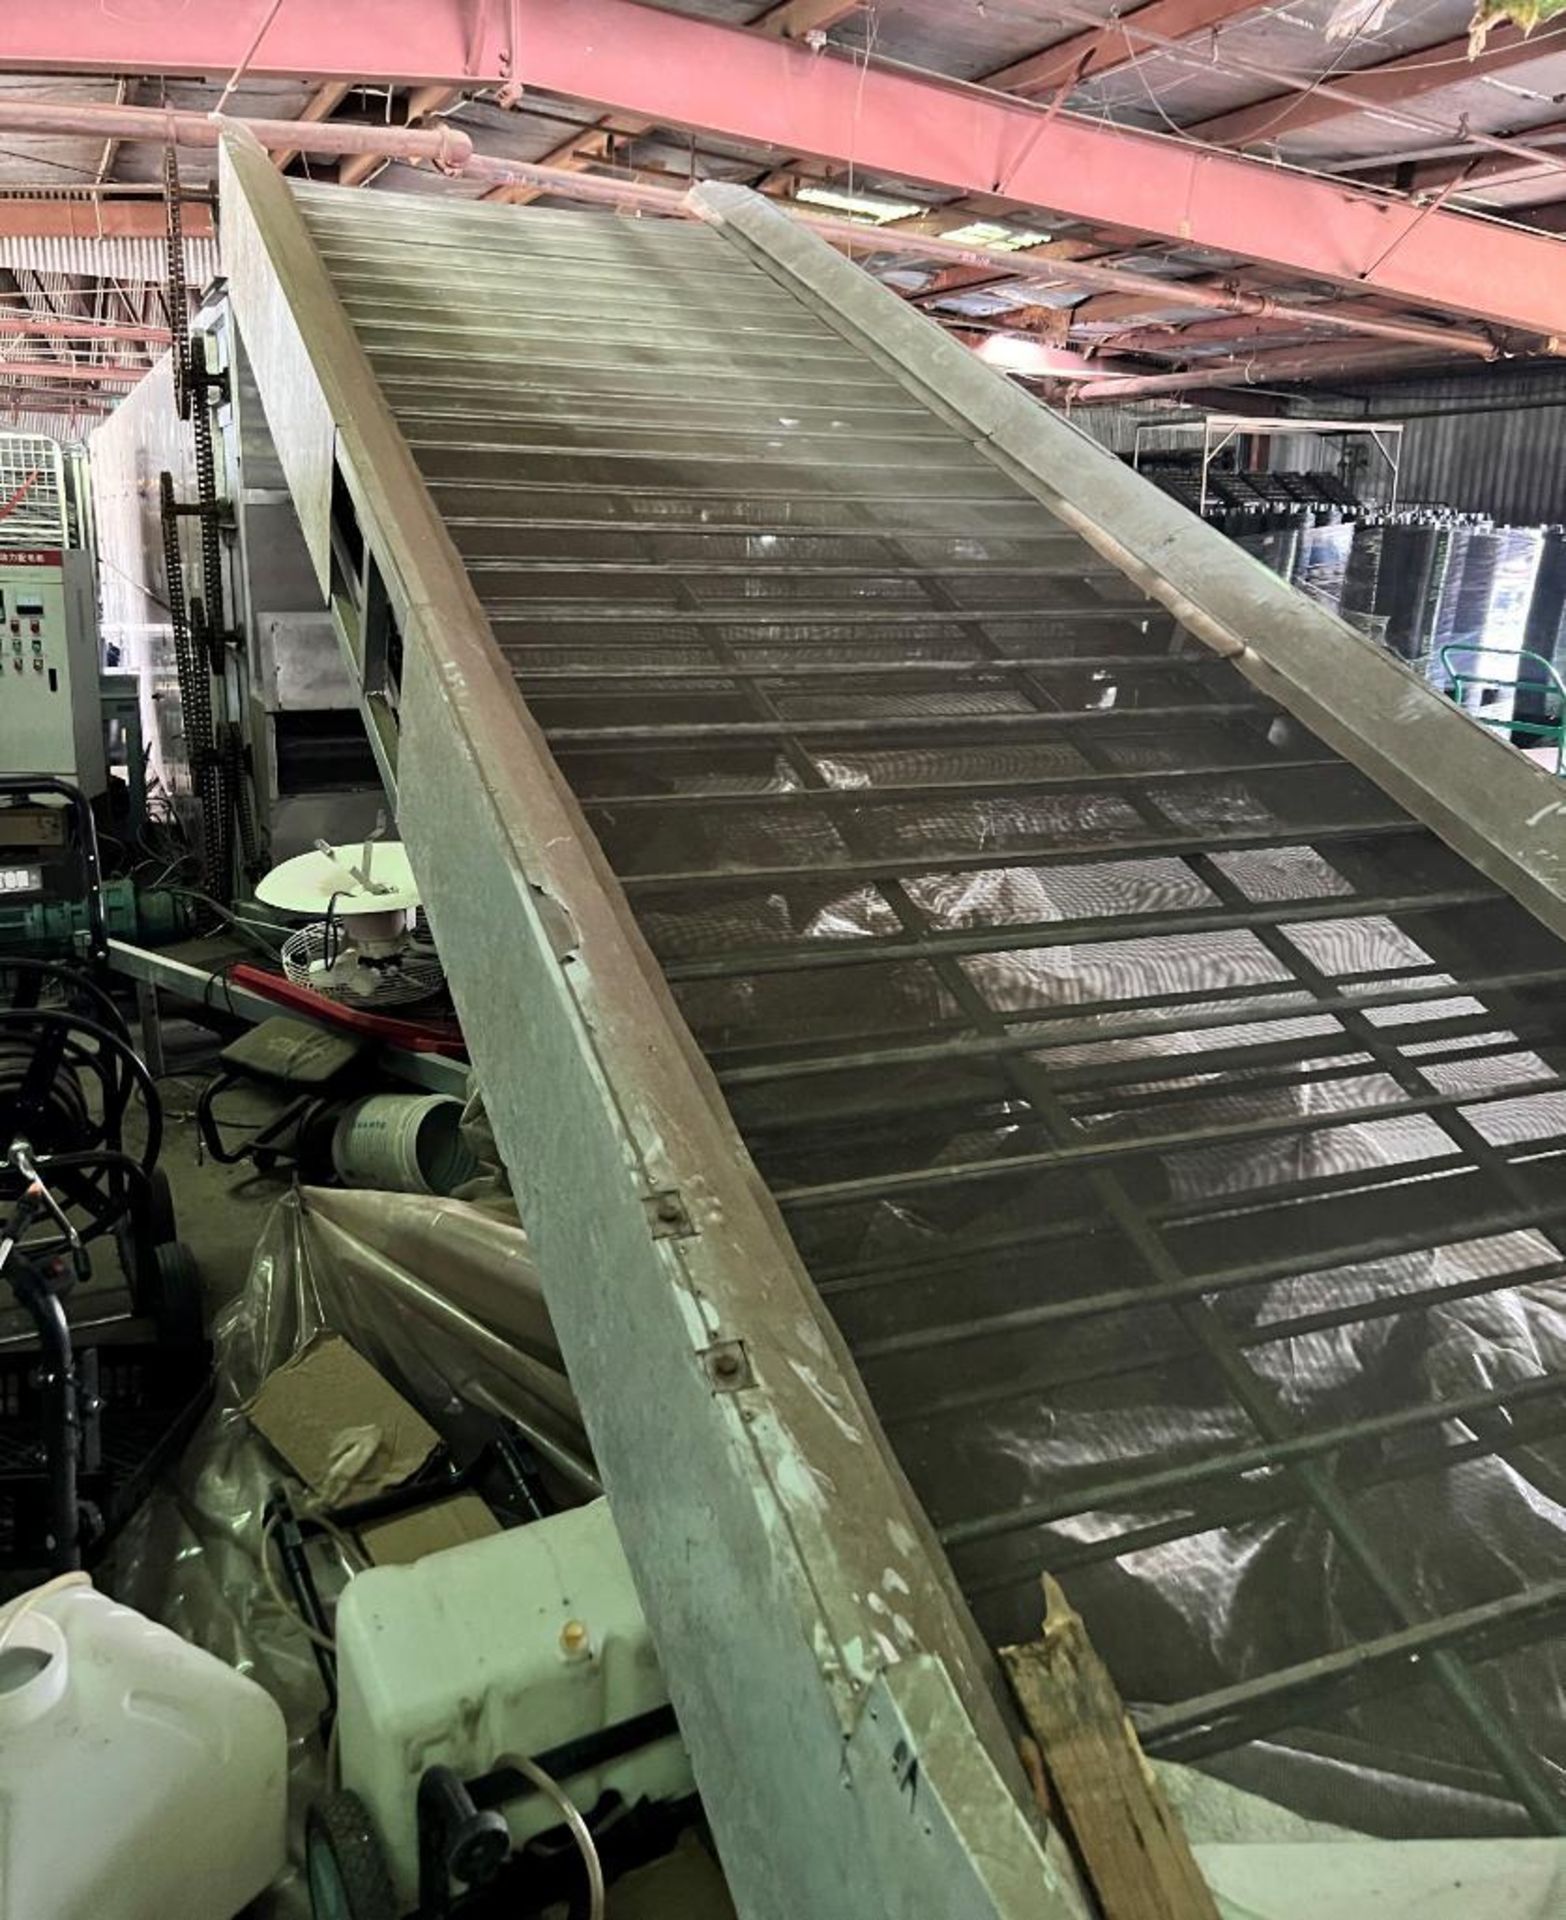 Guoxin Machinery 4 Pass Belt Dryer. Steel mesh belt approximate 65" wide, approximate length 37'. In - Image 13 of 34